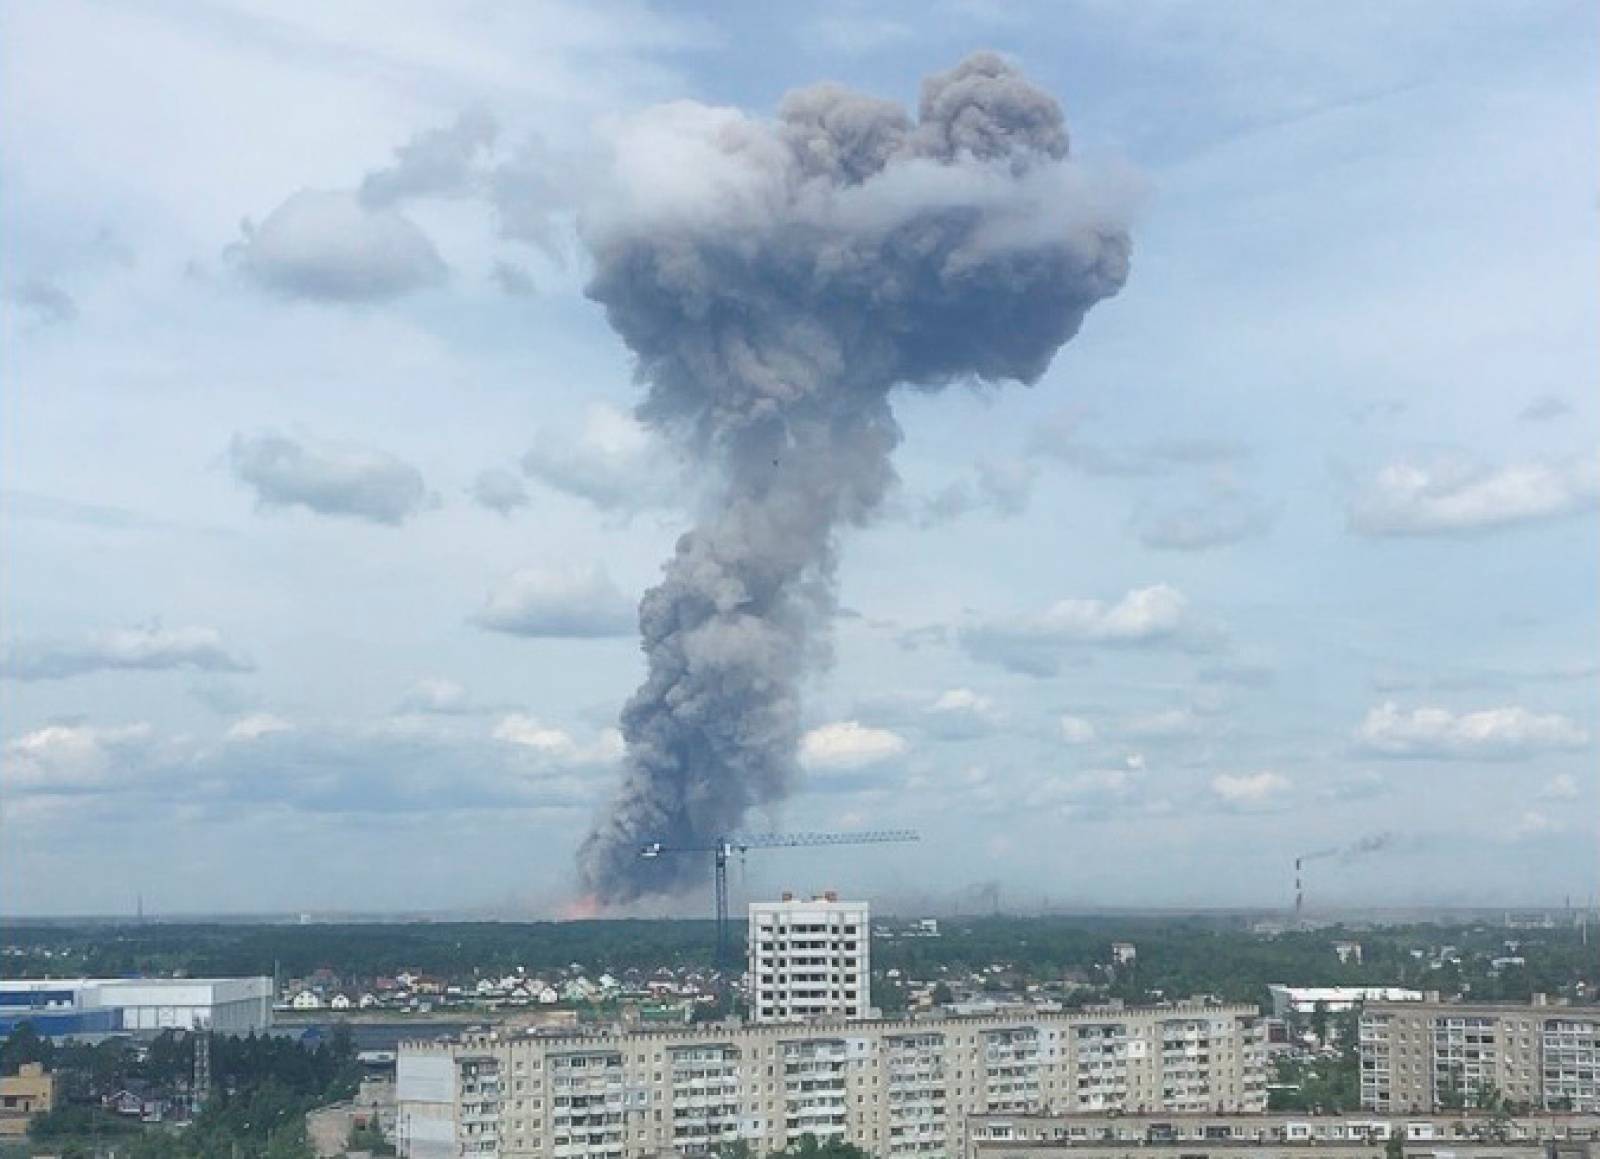 AÂ stillÂ image,Â takenÂ fromÂ aÂ videoÂ footage,Â shows smokeÂ risingÂ from the site of blasts at an explosives plant in the town of Dzerzhinsk